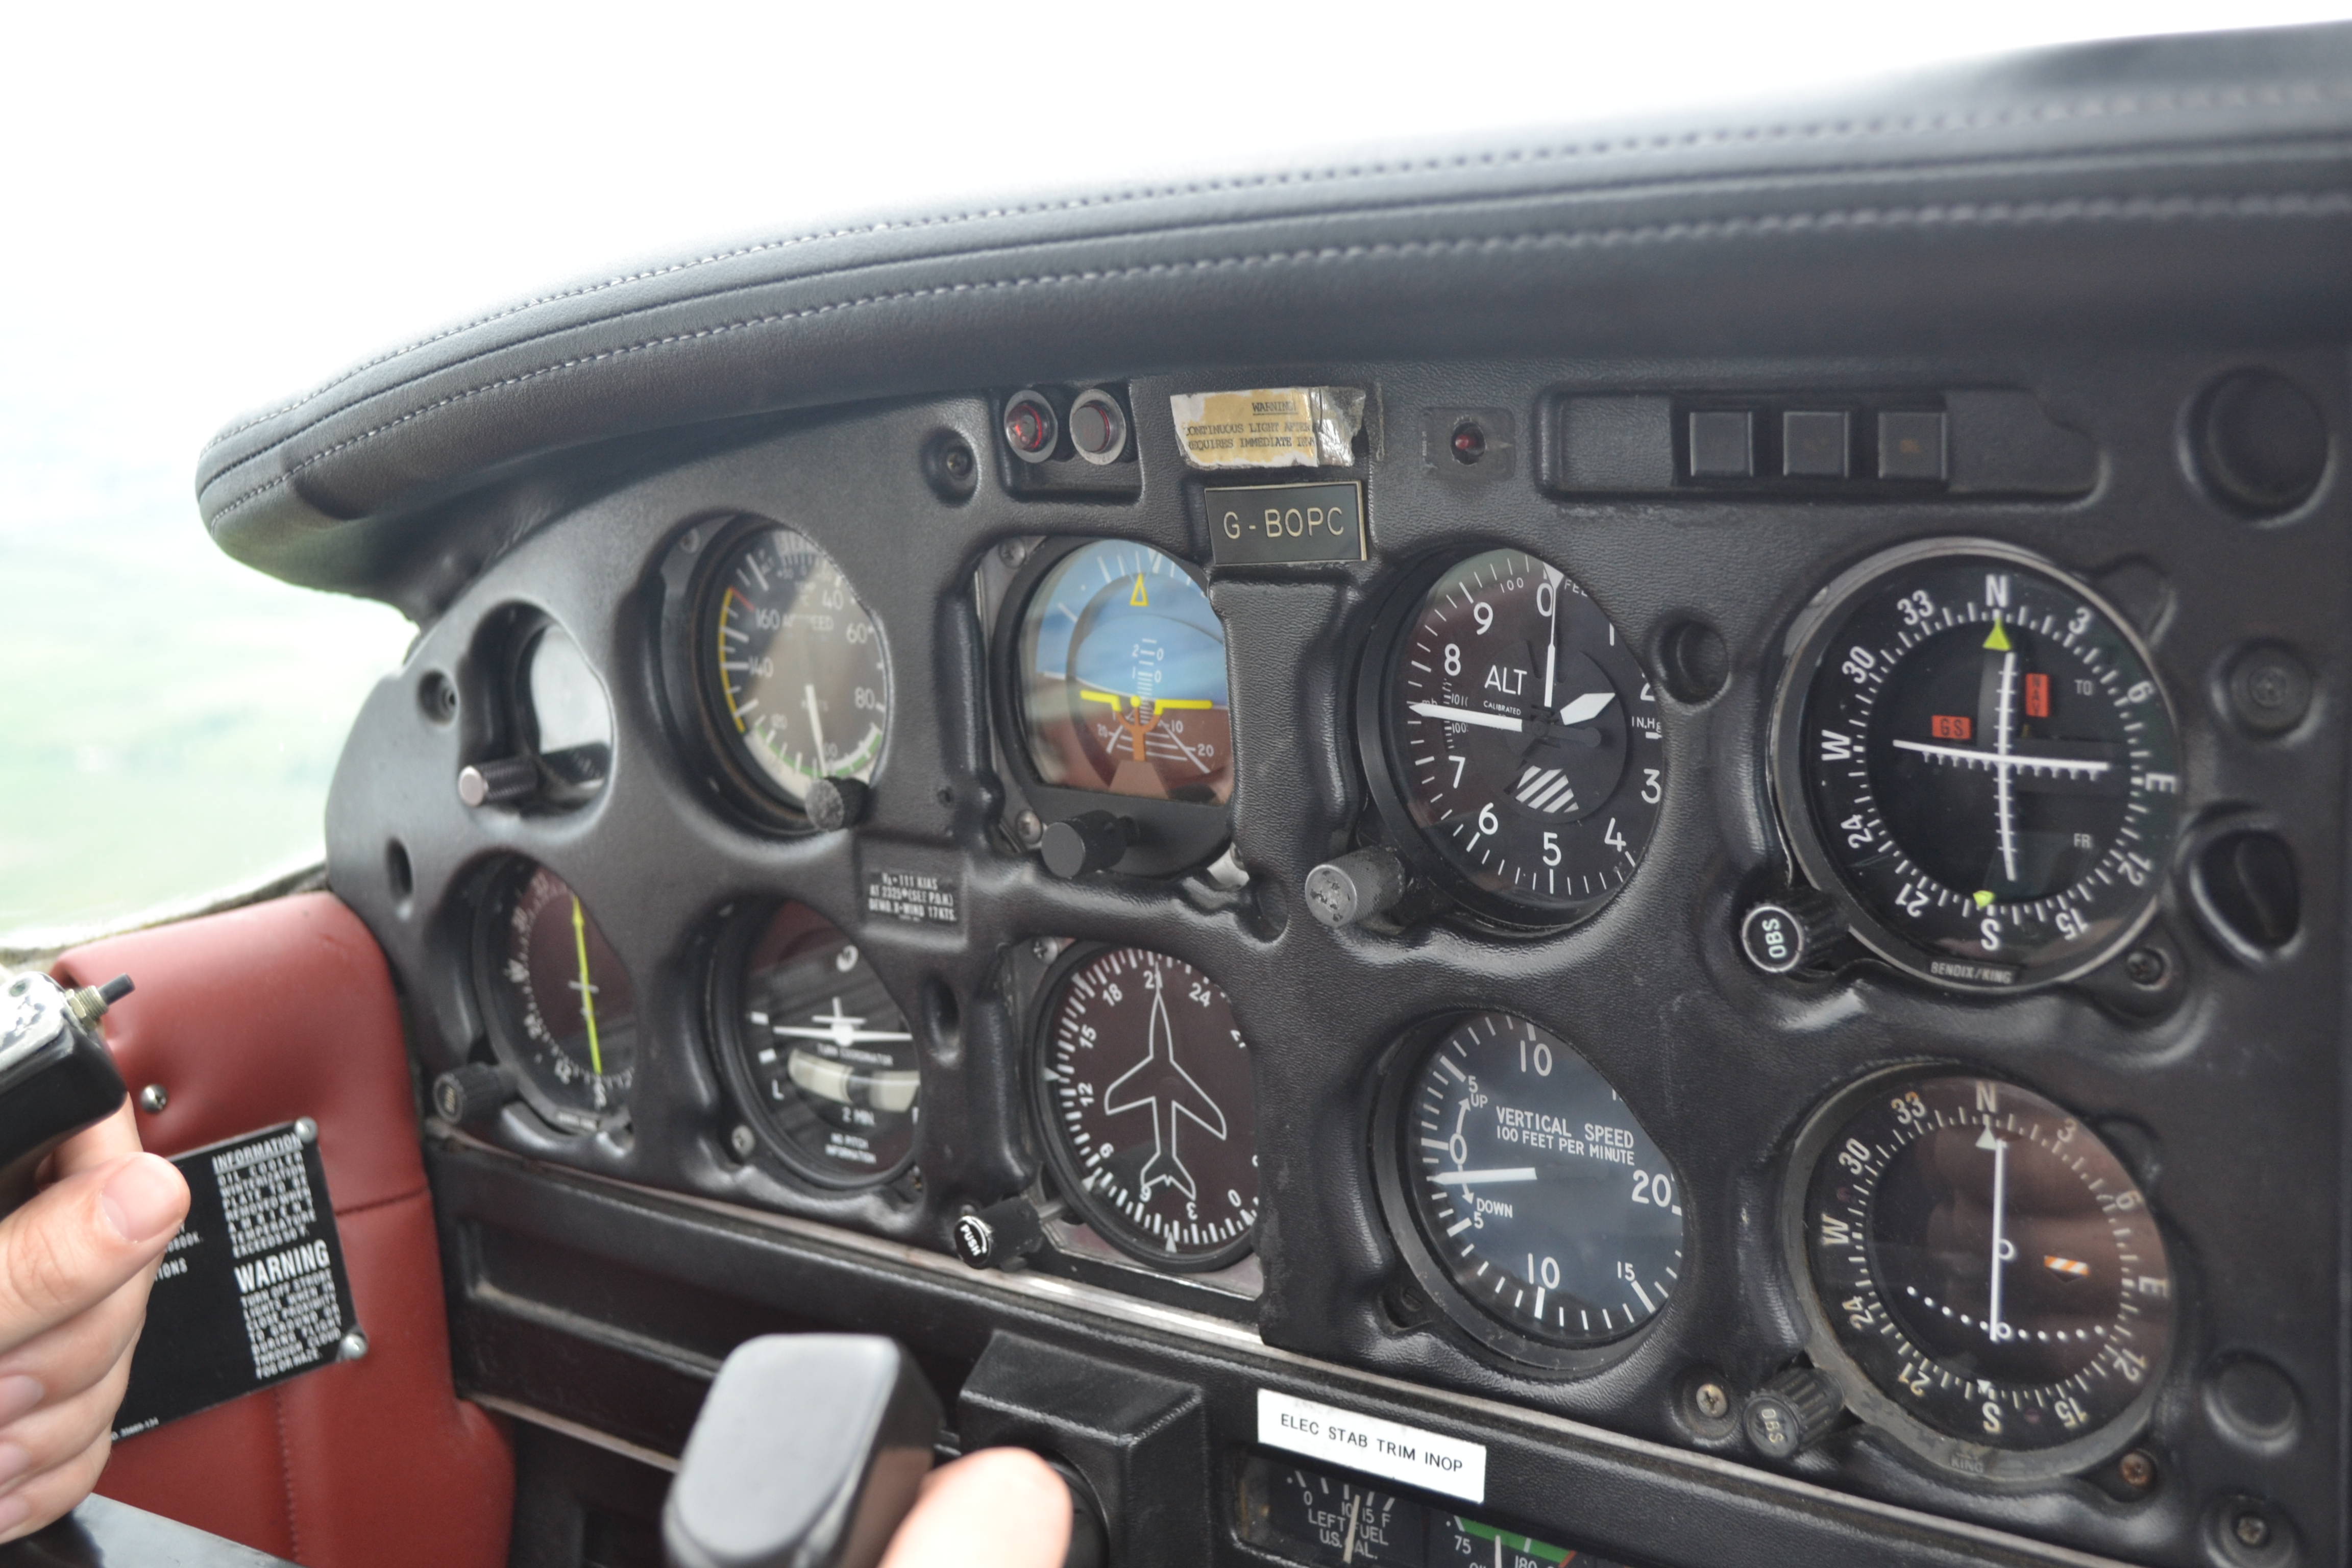 Cockpit instruments in the PA-28